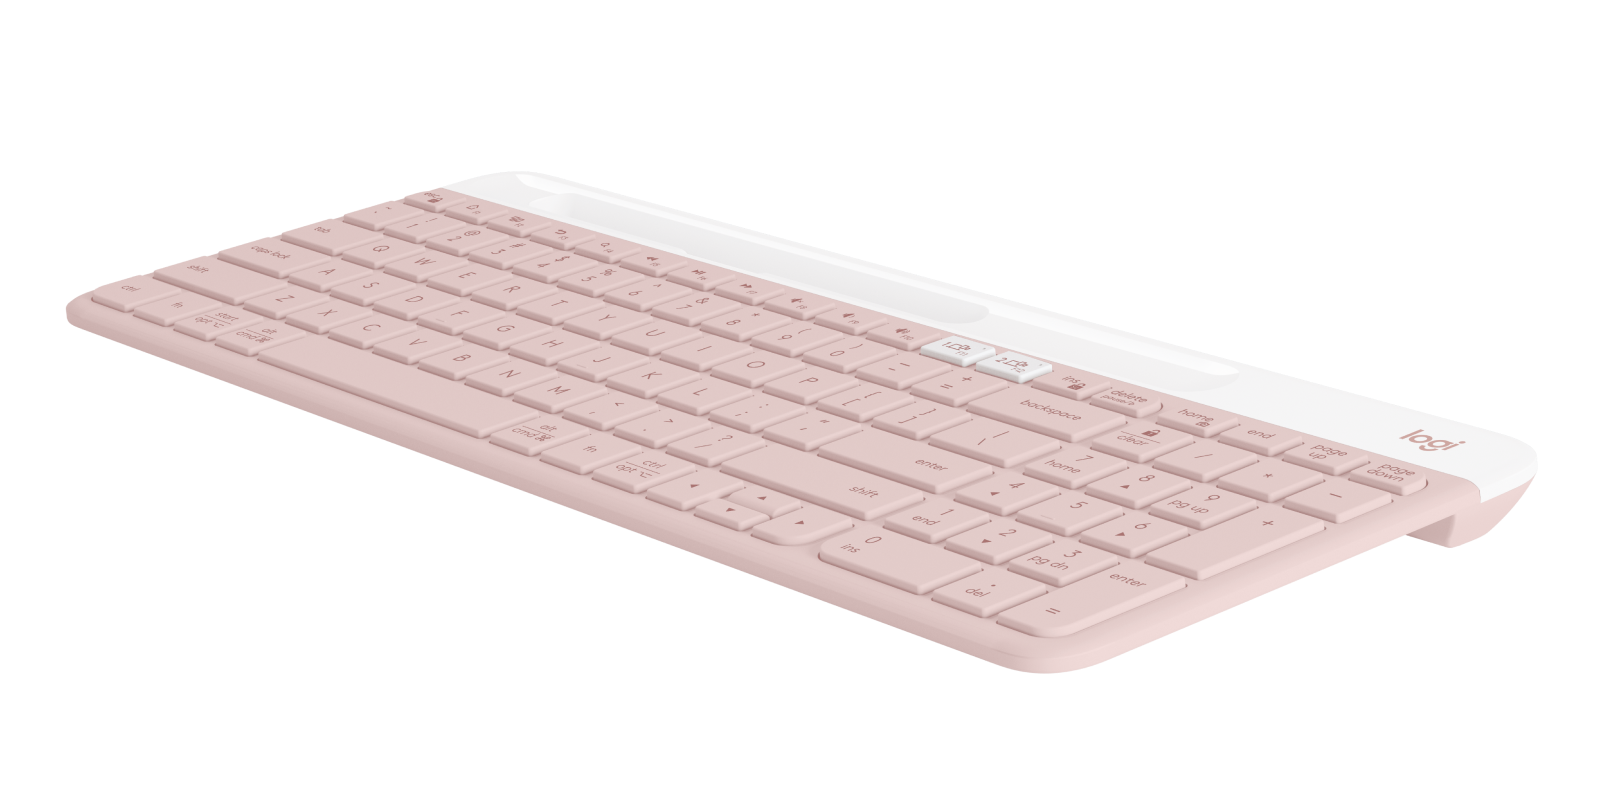 Image of K585 Slim Multi-Device Wireless Keyboard Ultra-slim, compact, and quiet keyboard for computers, phones or tablets - Rose English